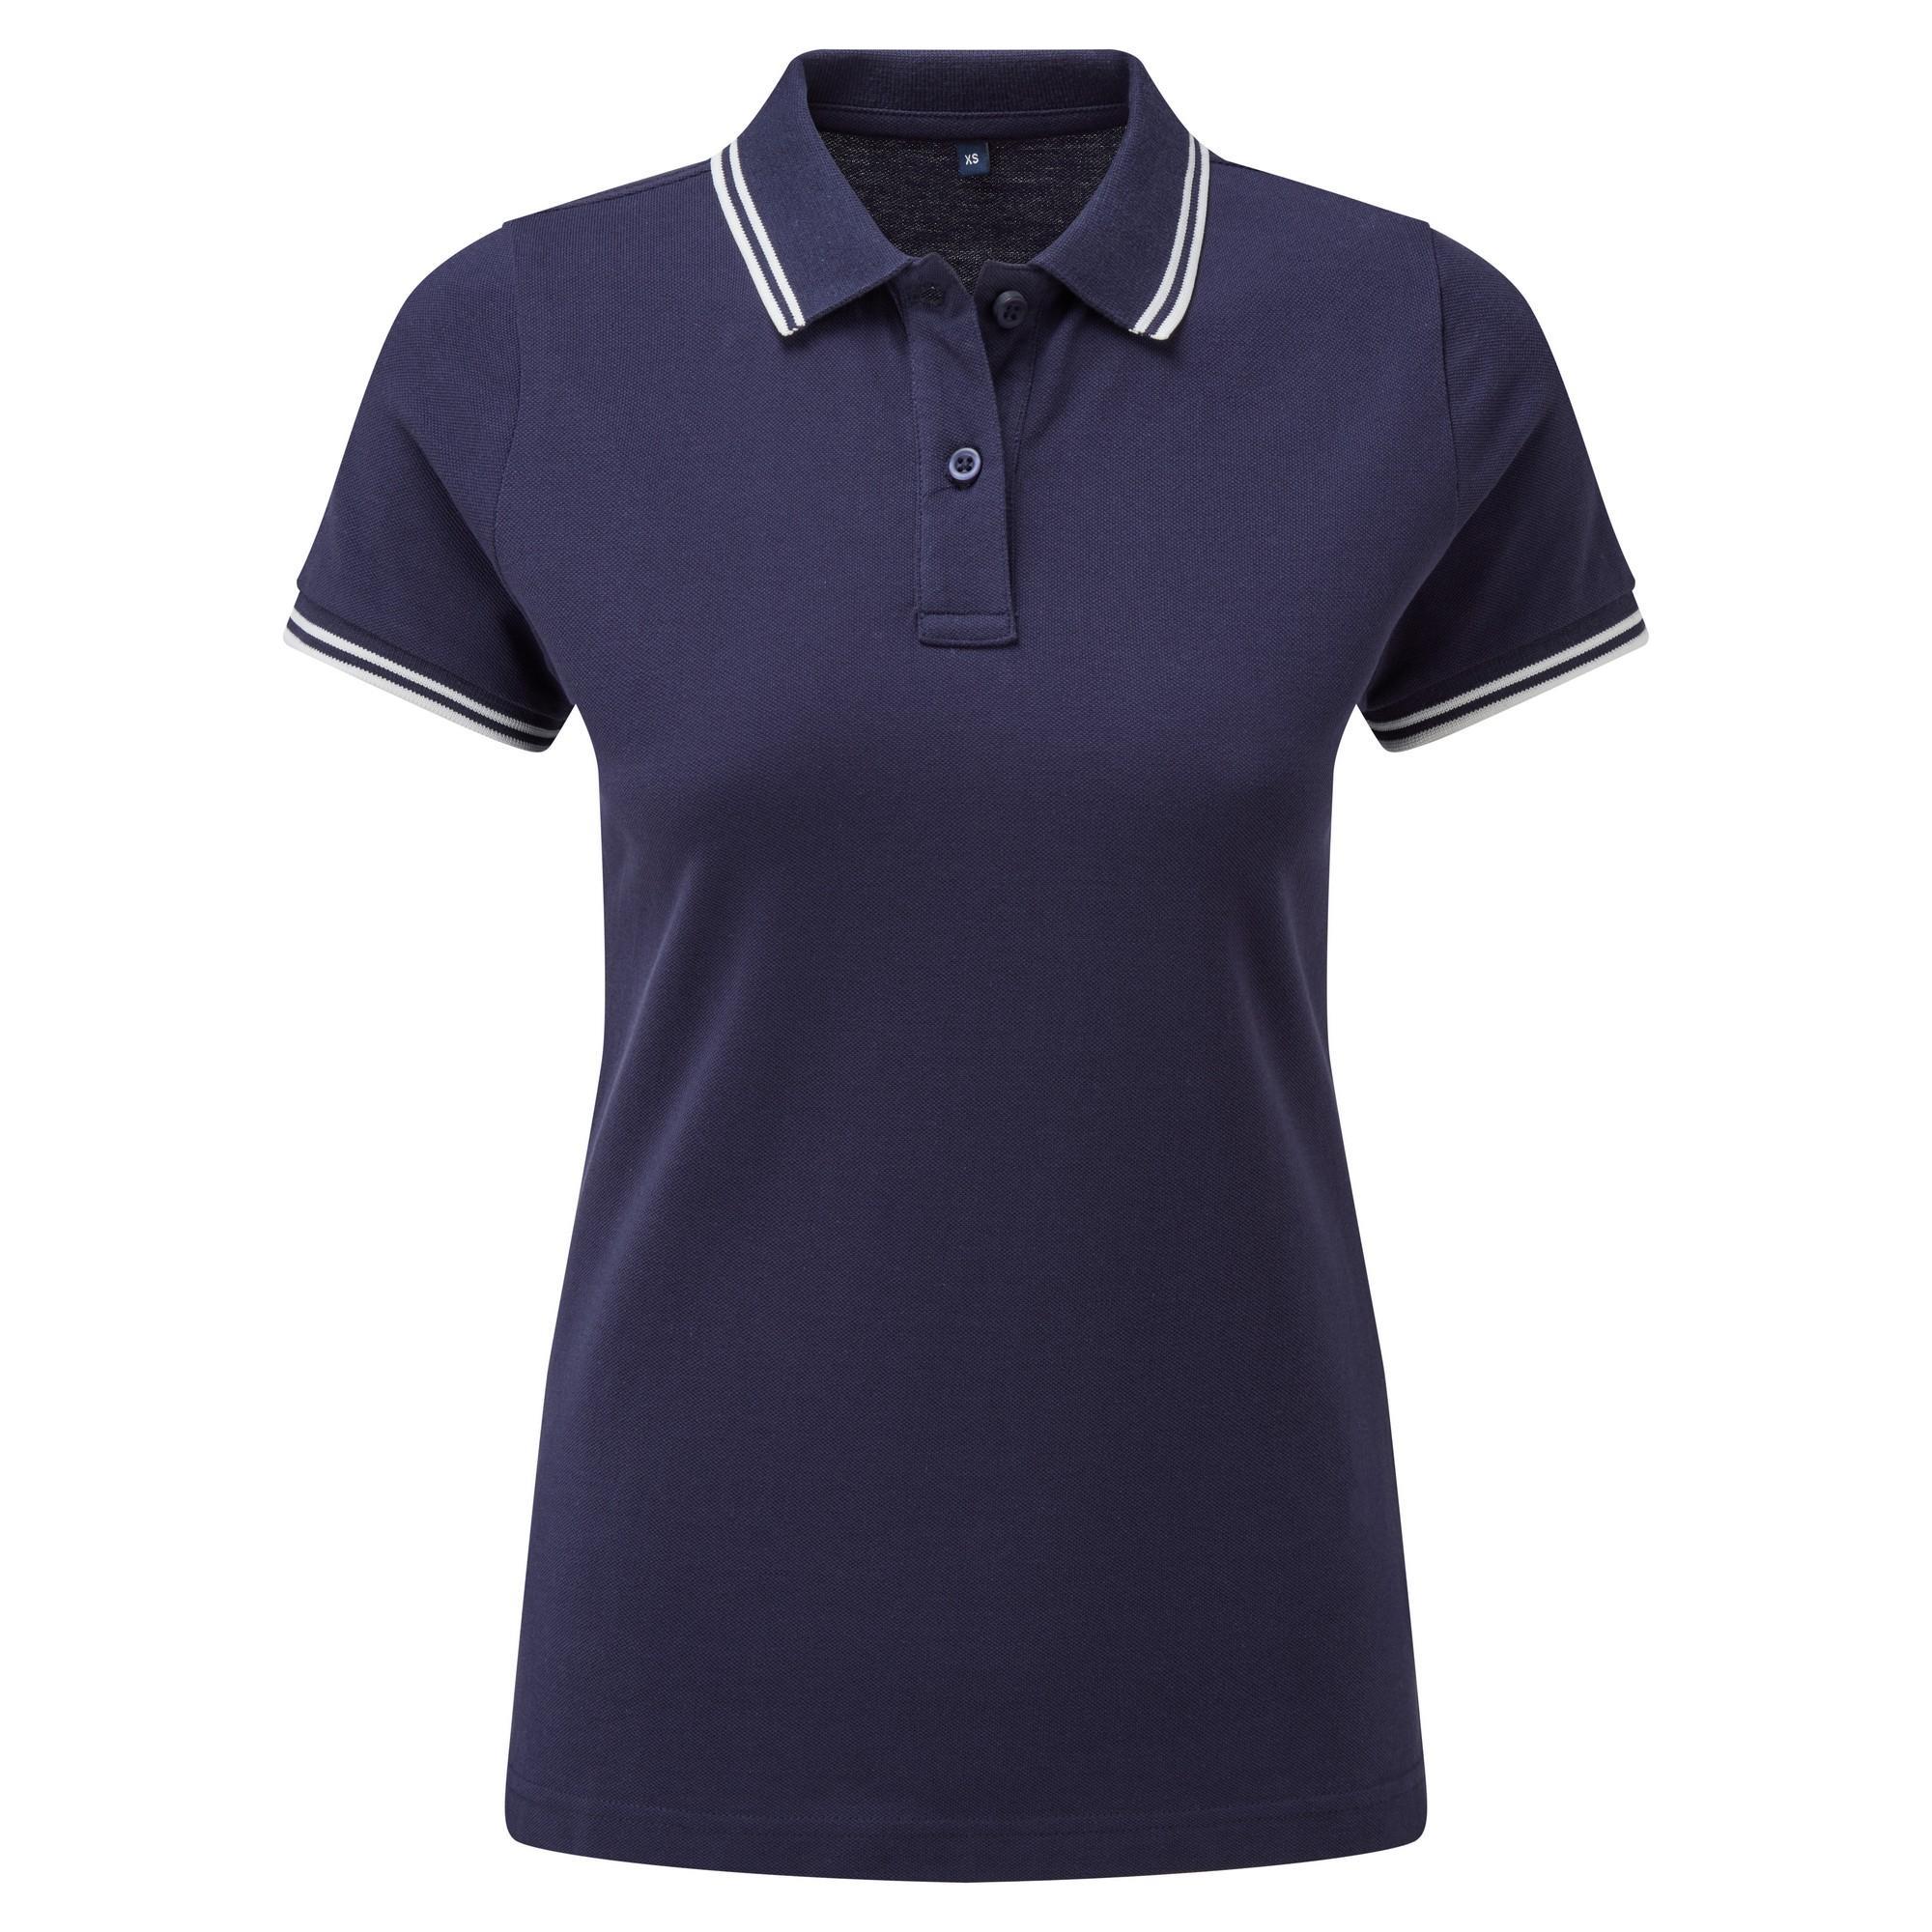 Asquith & Fox Womens/Ladies Classic Fit Tipped Polo (Navy/White) (XL)